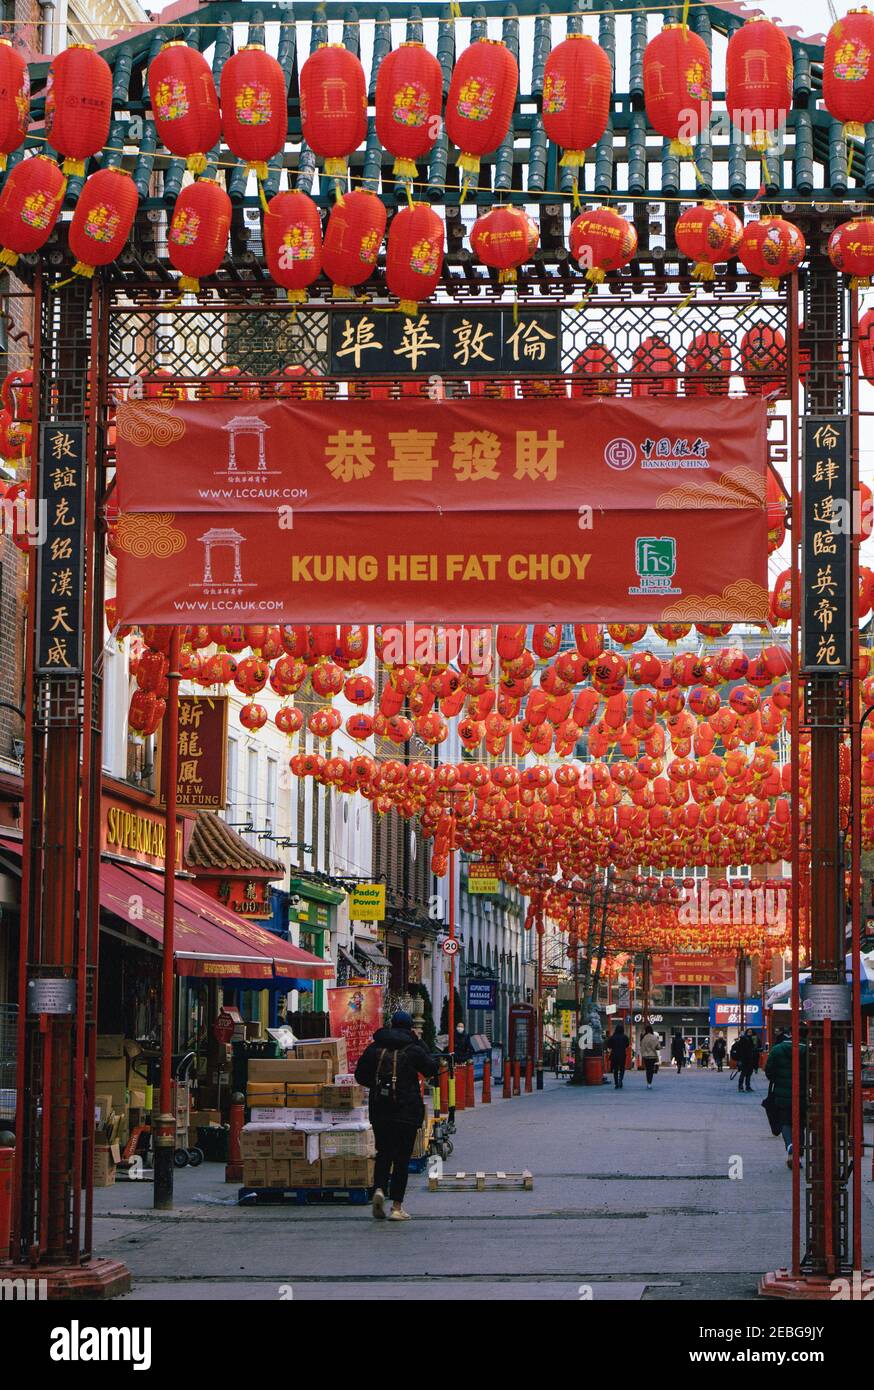 China Town, London, UK, 12th February 2021. Chinese New Year decorations. Chines New Year is a major event, although due to Covid 19 celebrations have been cancelled this year. Decorations were still put up in China Town. This year is the year of the Ox Stock Photo